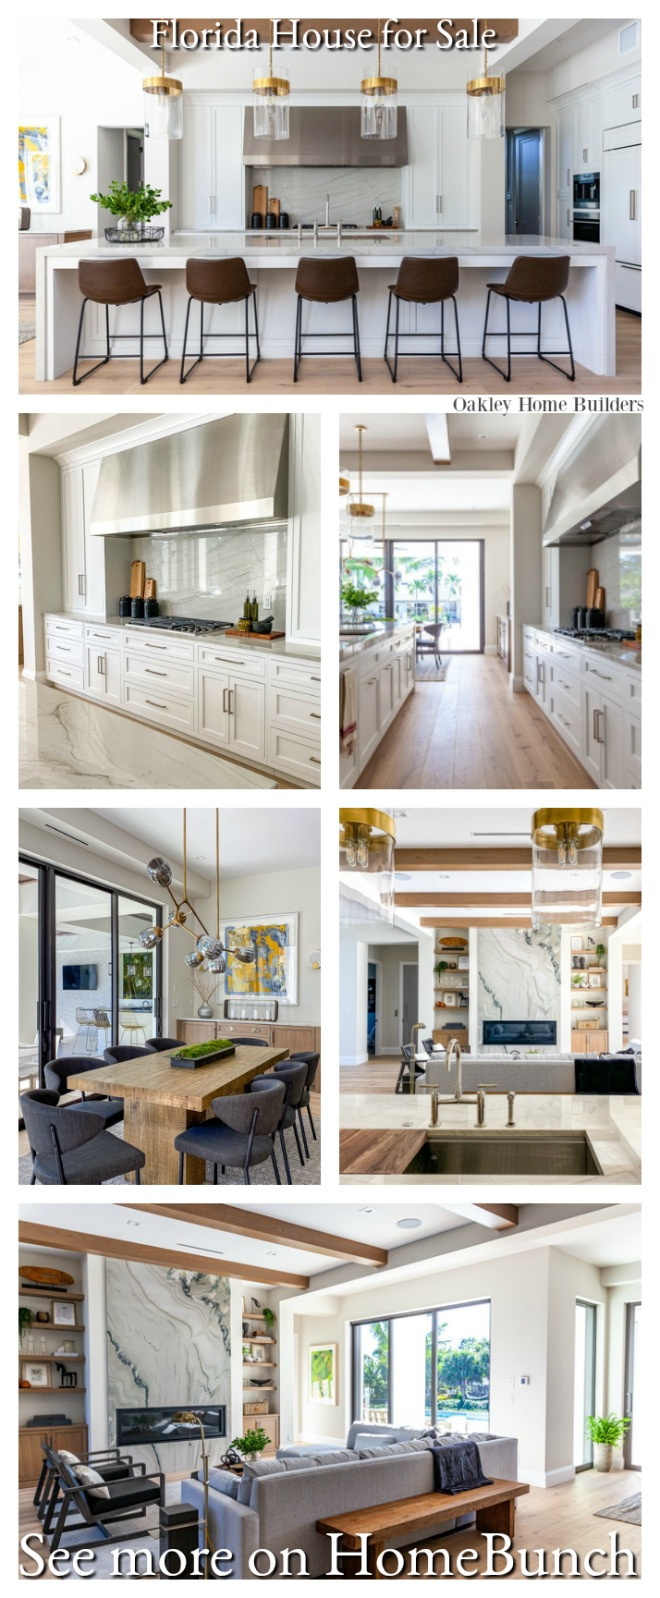 Home with Neutral Interiors featuring a L-shaped Kitchen - Home Bunch  Interior Design Ideas